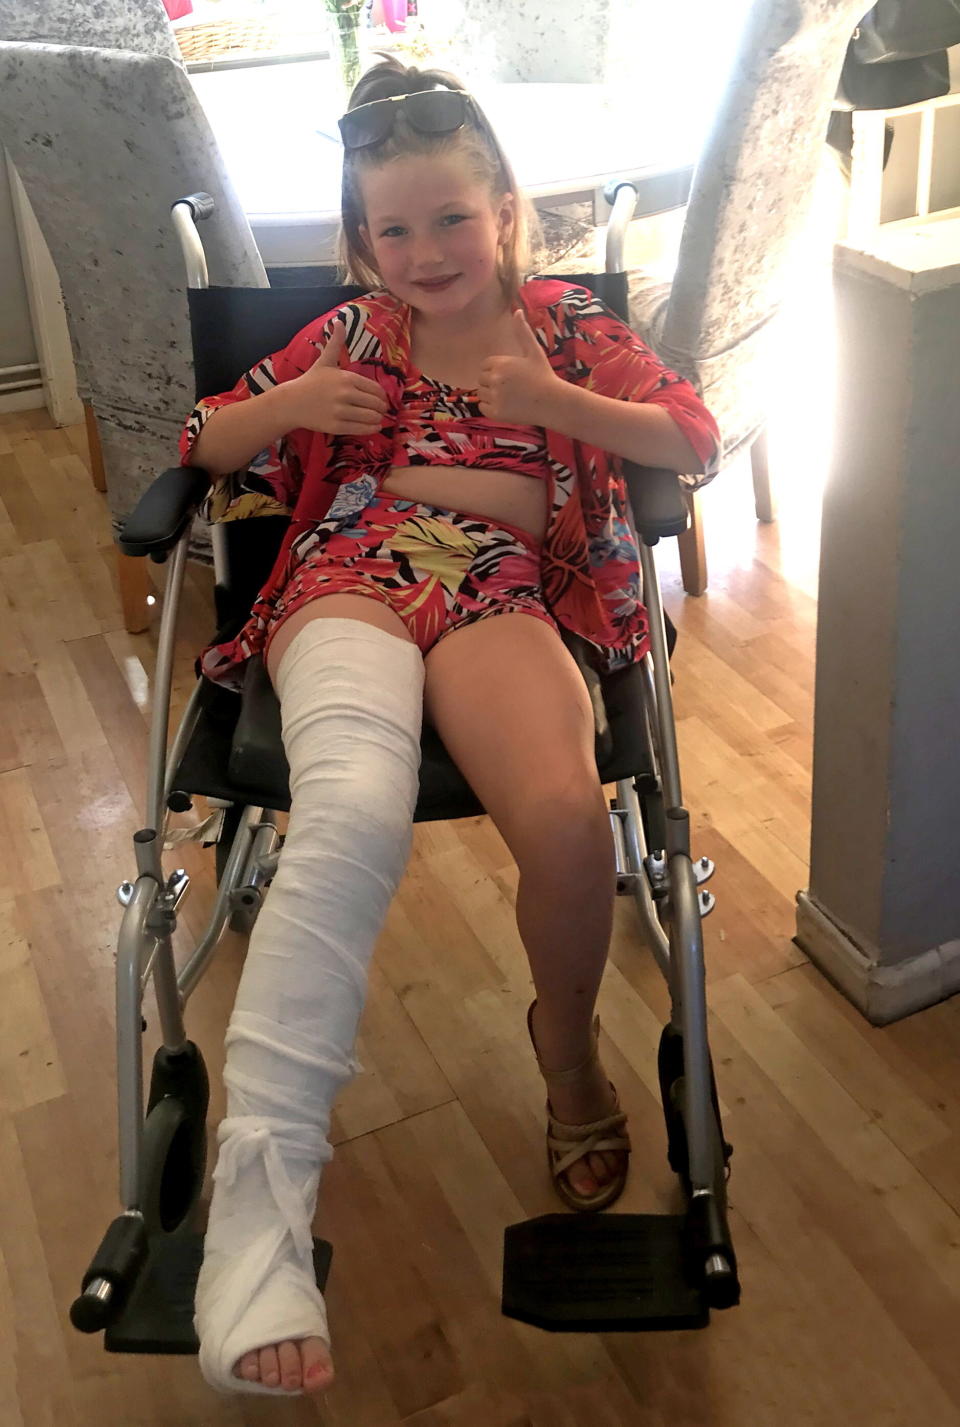 Pictured: Elliemai Smith with her leg in a cast.

An eight year old girl suffered concussion and a broken leg when a hit-and-run e-scooter rider ploughed into her on a footpath at 'over 20mph'.  Elliemai Smith was sent flying as the scooter smashed into her before the man riding it sped off, leaving her crying on the ground.

She was then rushed to hospital in an ambulance.  Police are now hunting the illegal rider and Elliemai's mother, 28 year old Kayleigh McColl, has appealed for anyone who recognises his description to come forward.  SEE OUR COPY FOR DETAILS.

Please byline: Family/Solent News

Â© Family/Solent News & Photo Agency
UK +44 (0) 2380 458800
 *** Local Caption *** Submitted to us by mum Kayleigh McColl,

07740906872
kayleighlouisepennie@gmail.com